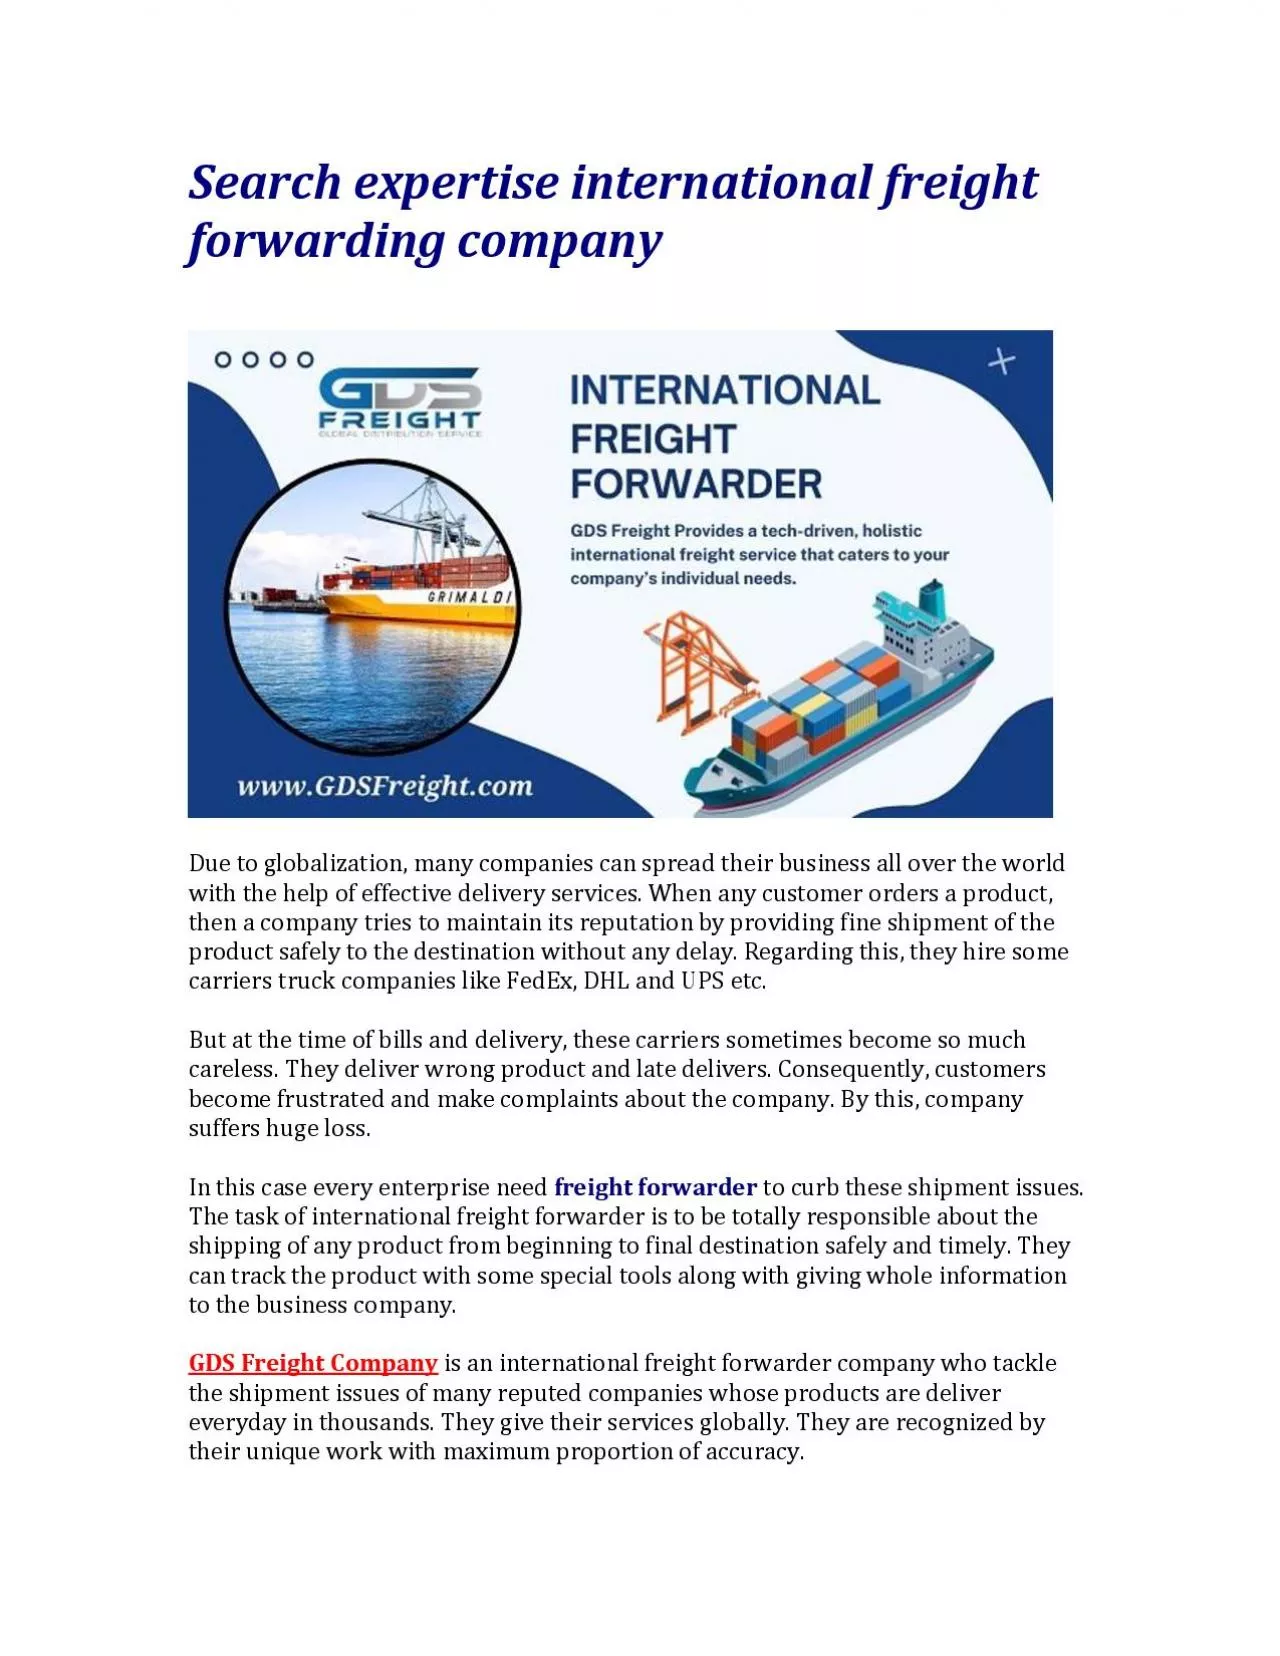 Search expertise international freight forwarding company